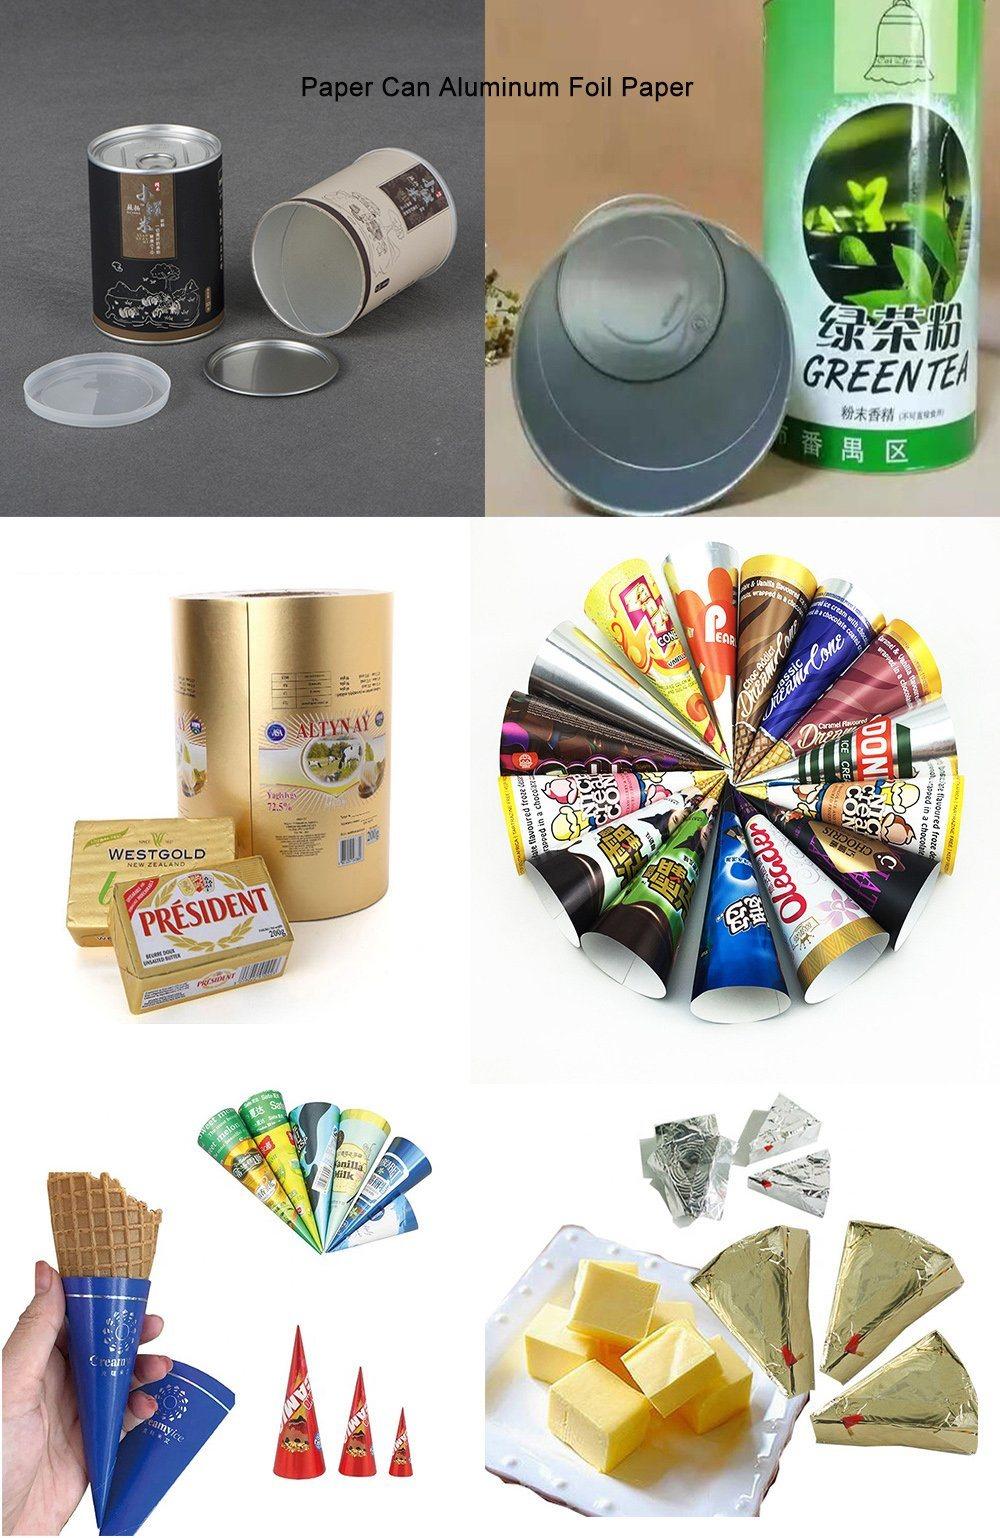 Wrapping Biodegradable Aluminum Foil for Ice Cream Bar Butter Packaging Paper